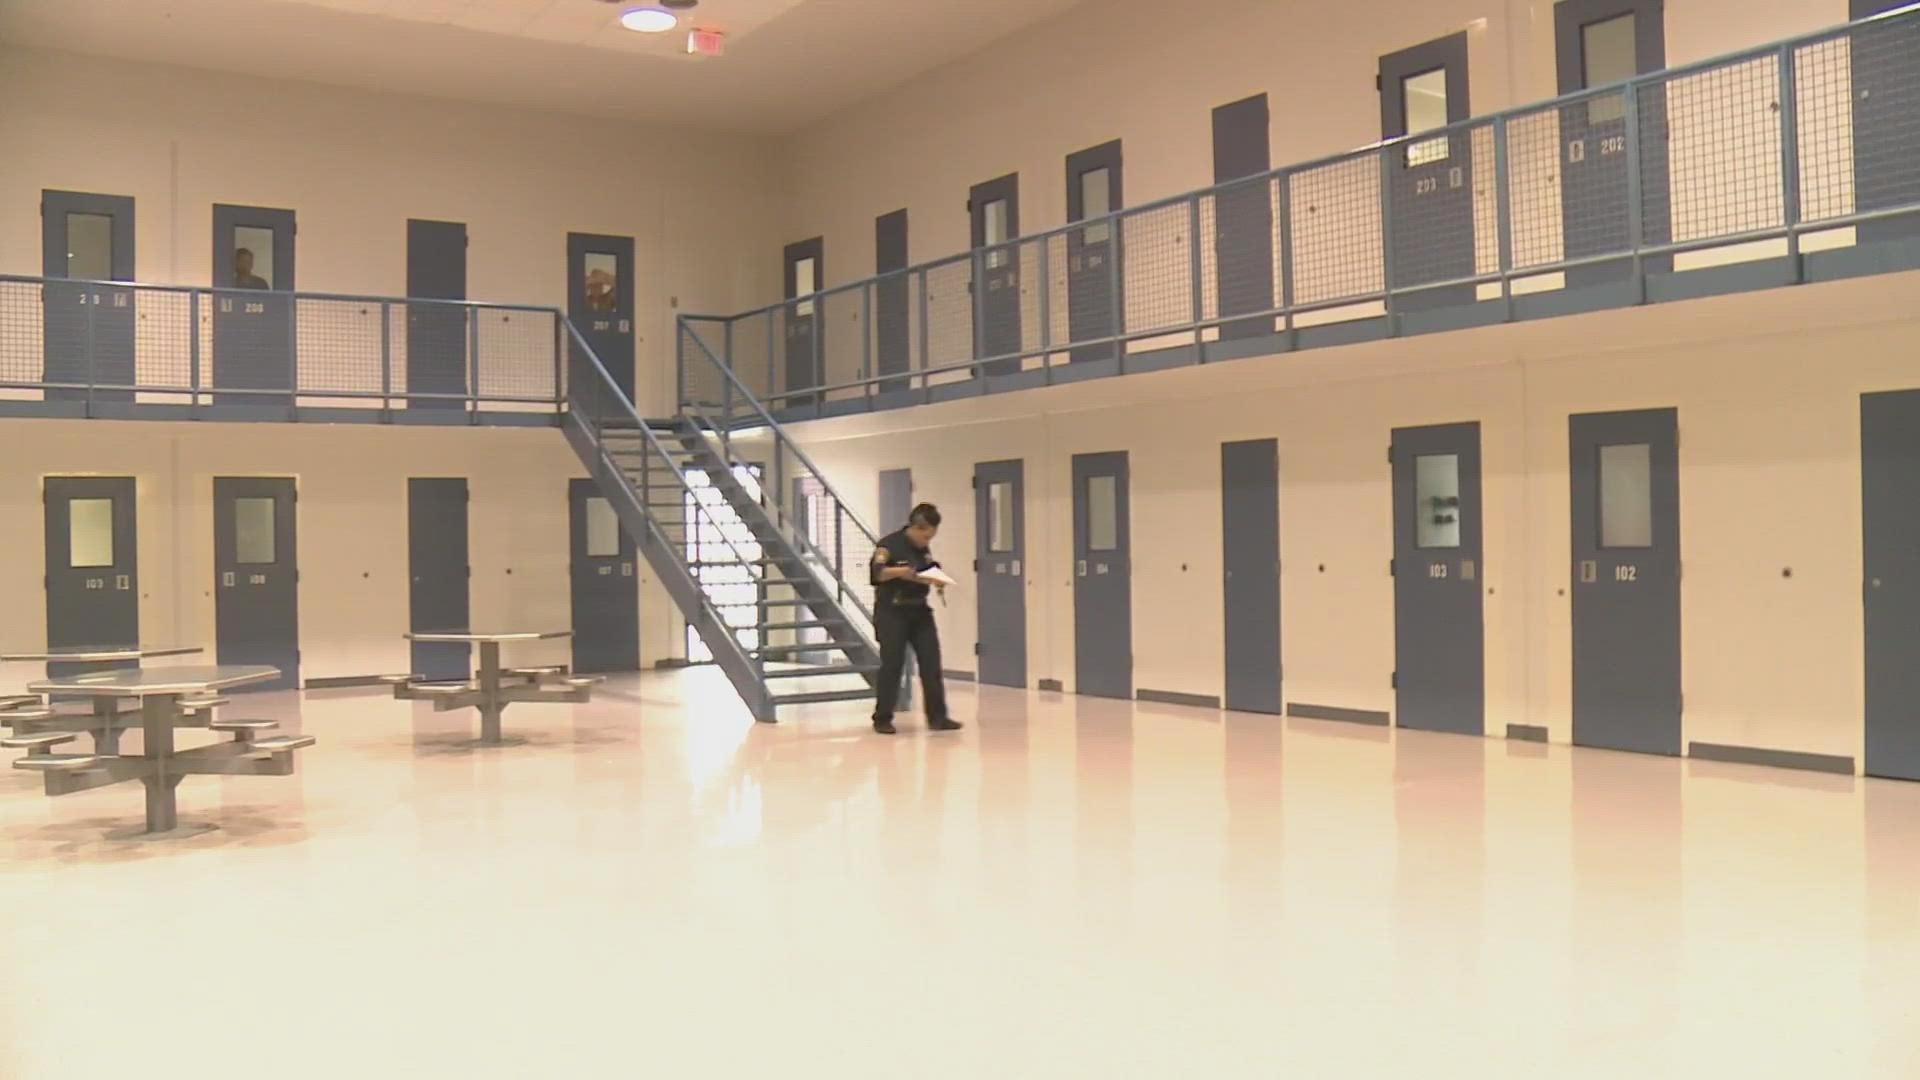 The Knox County Sheriff's Office it is facing a major staffing shortage at the jail. Three in every 10 positions, 30% of jobs within corrections are open.